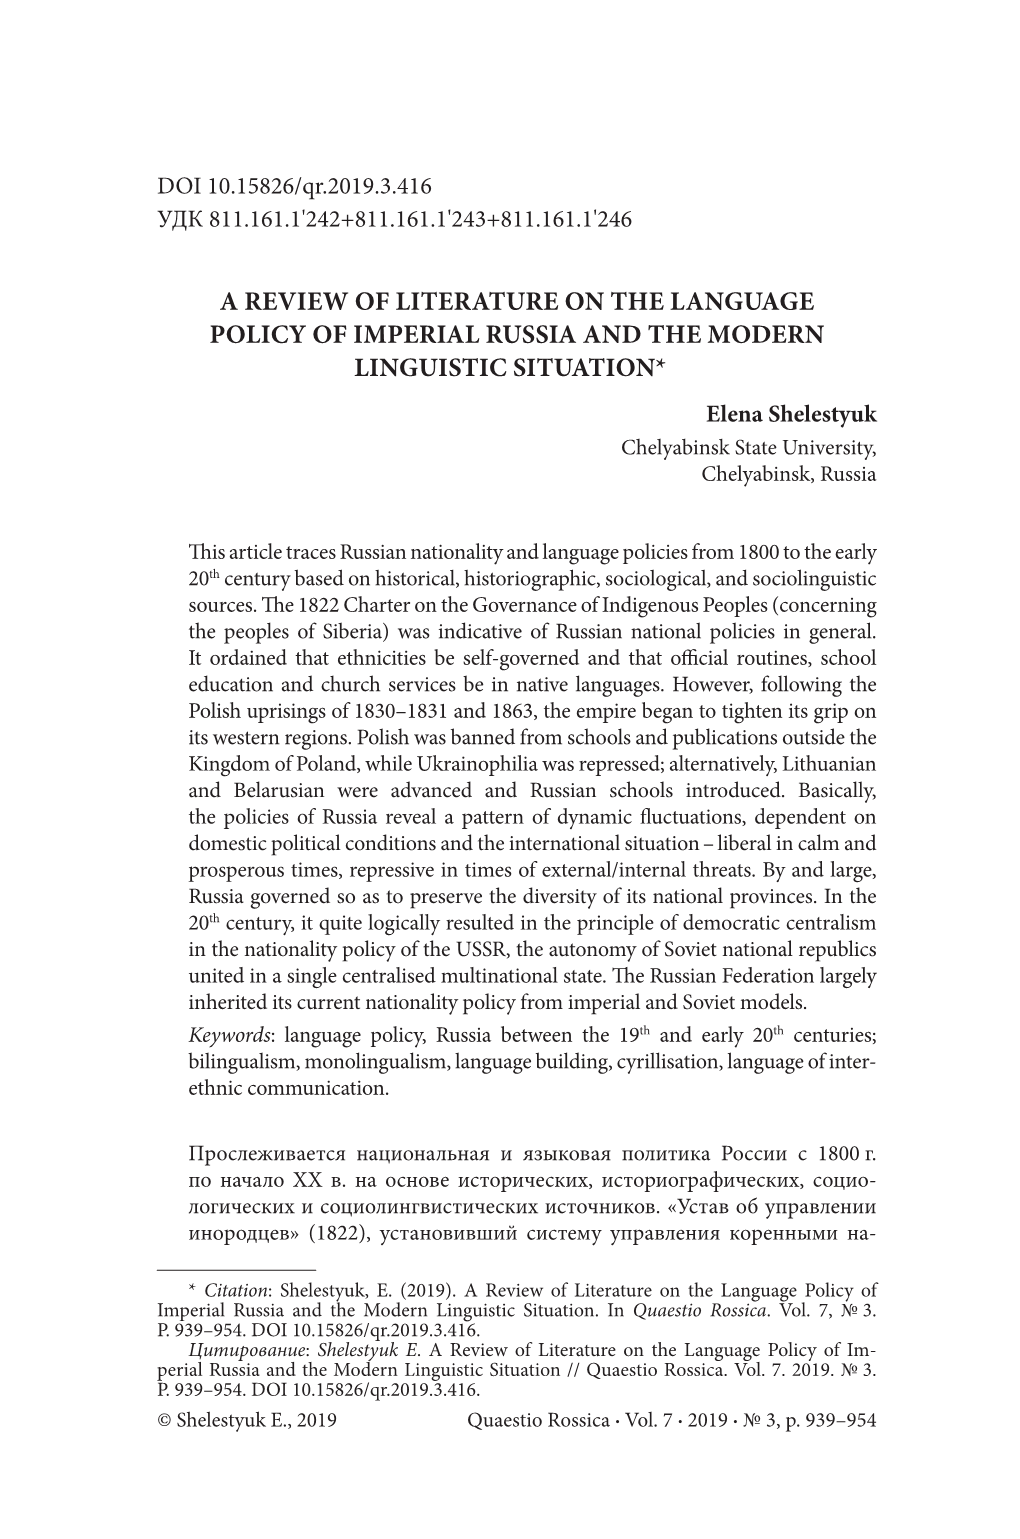 A Review of Literature on the Language Policy of Imperial